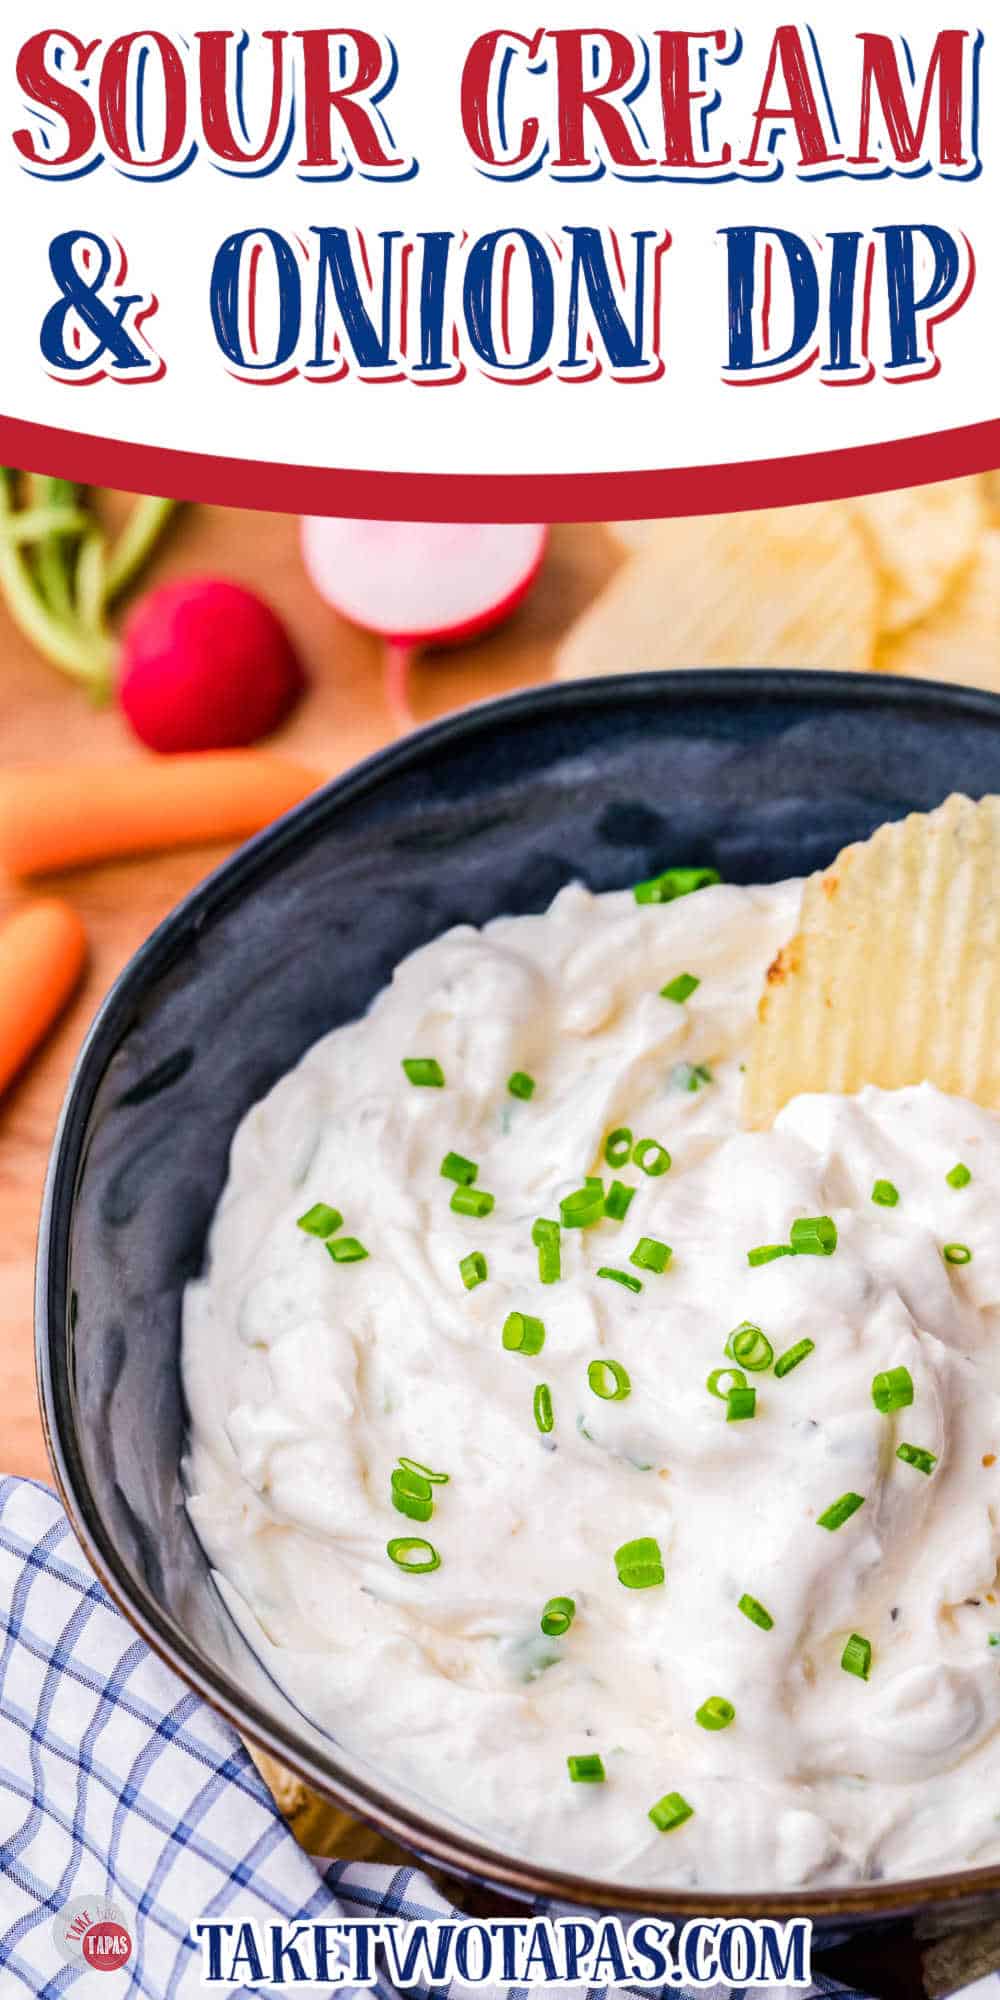 bowl of dip with text "sour cream and onion dip"